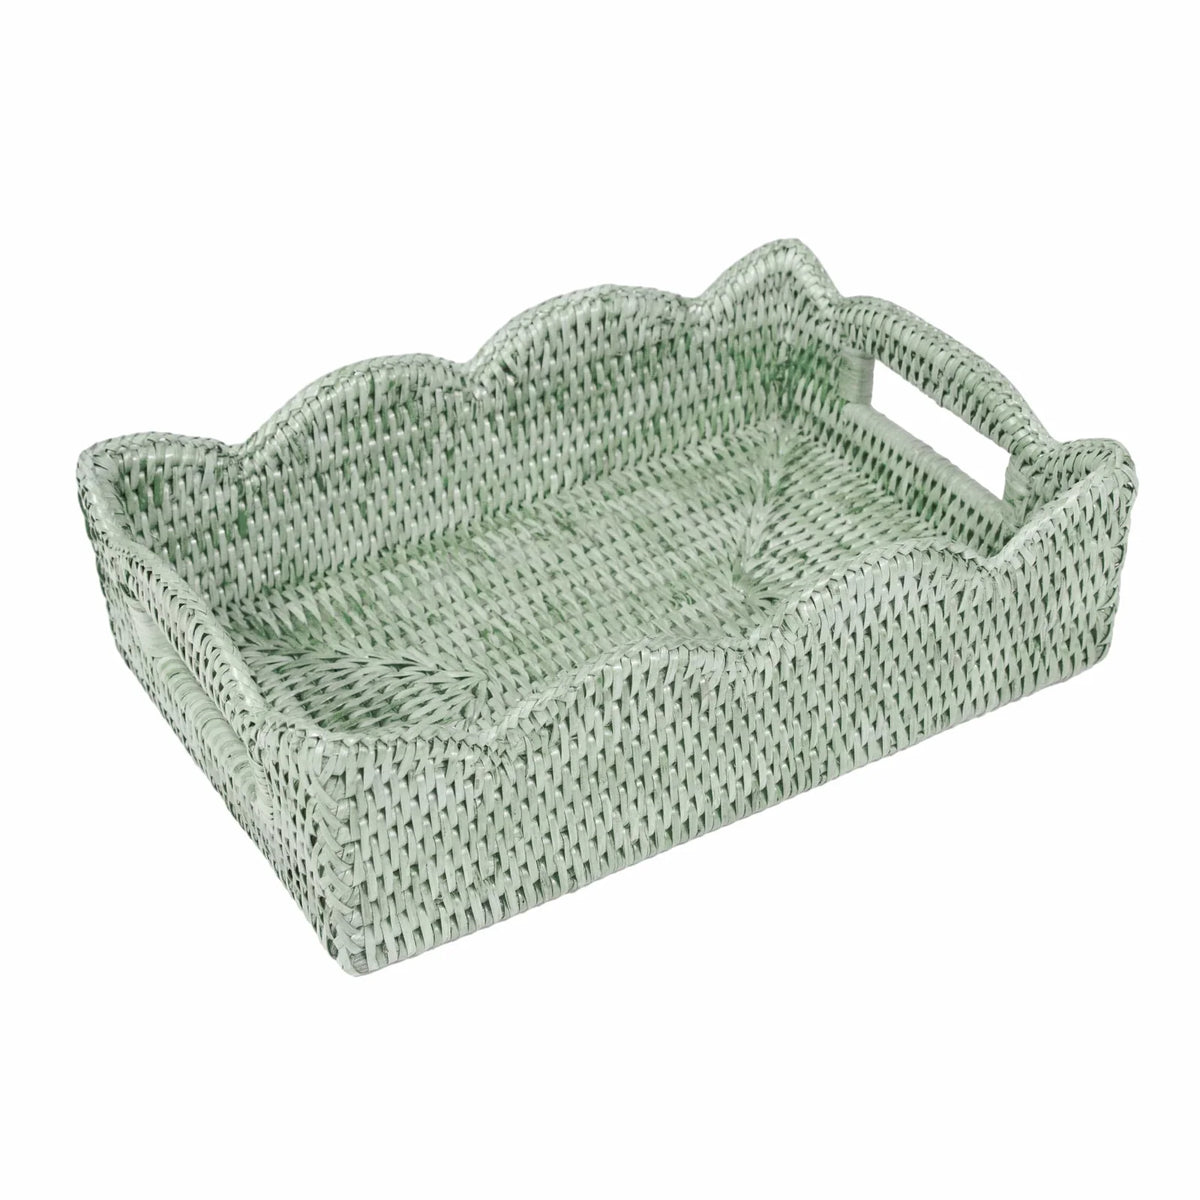 Rattan Scalloped Small Tray in Green